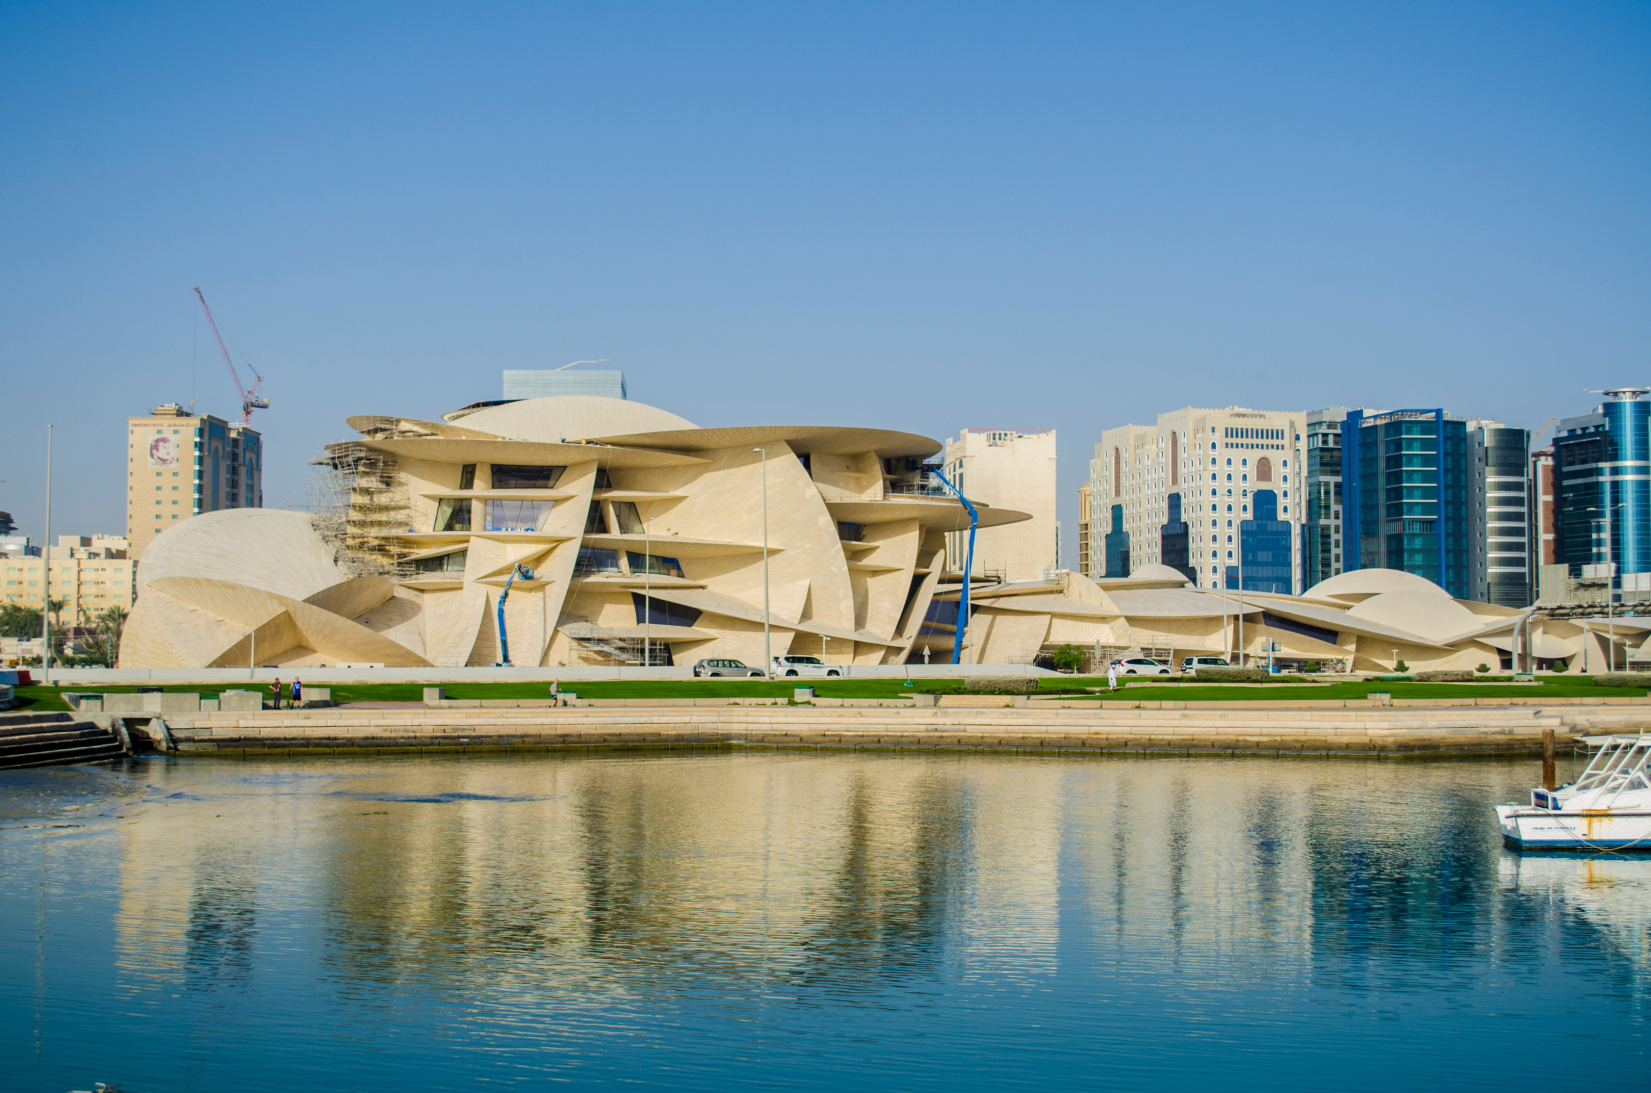 National Museum of Qatar | Doha, Qatar Attractions - Lonely Planet